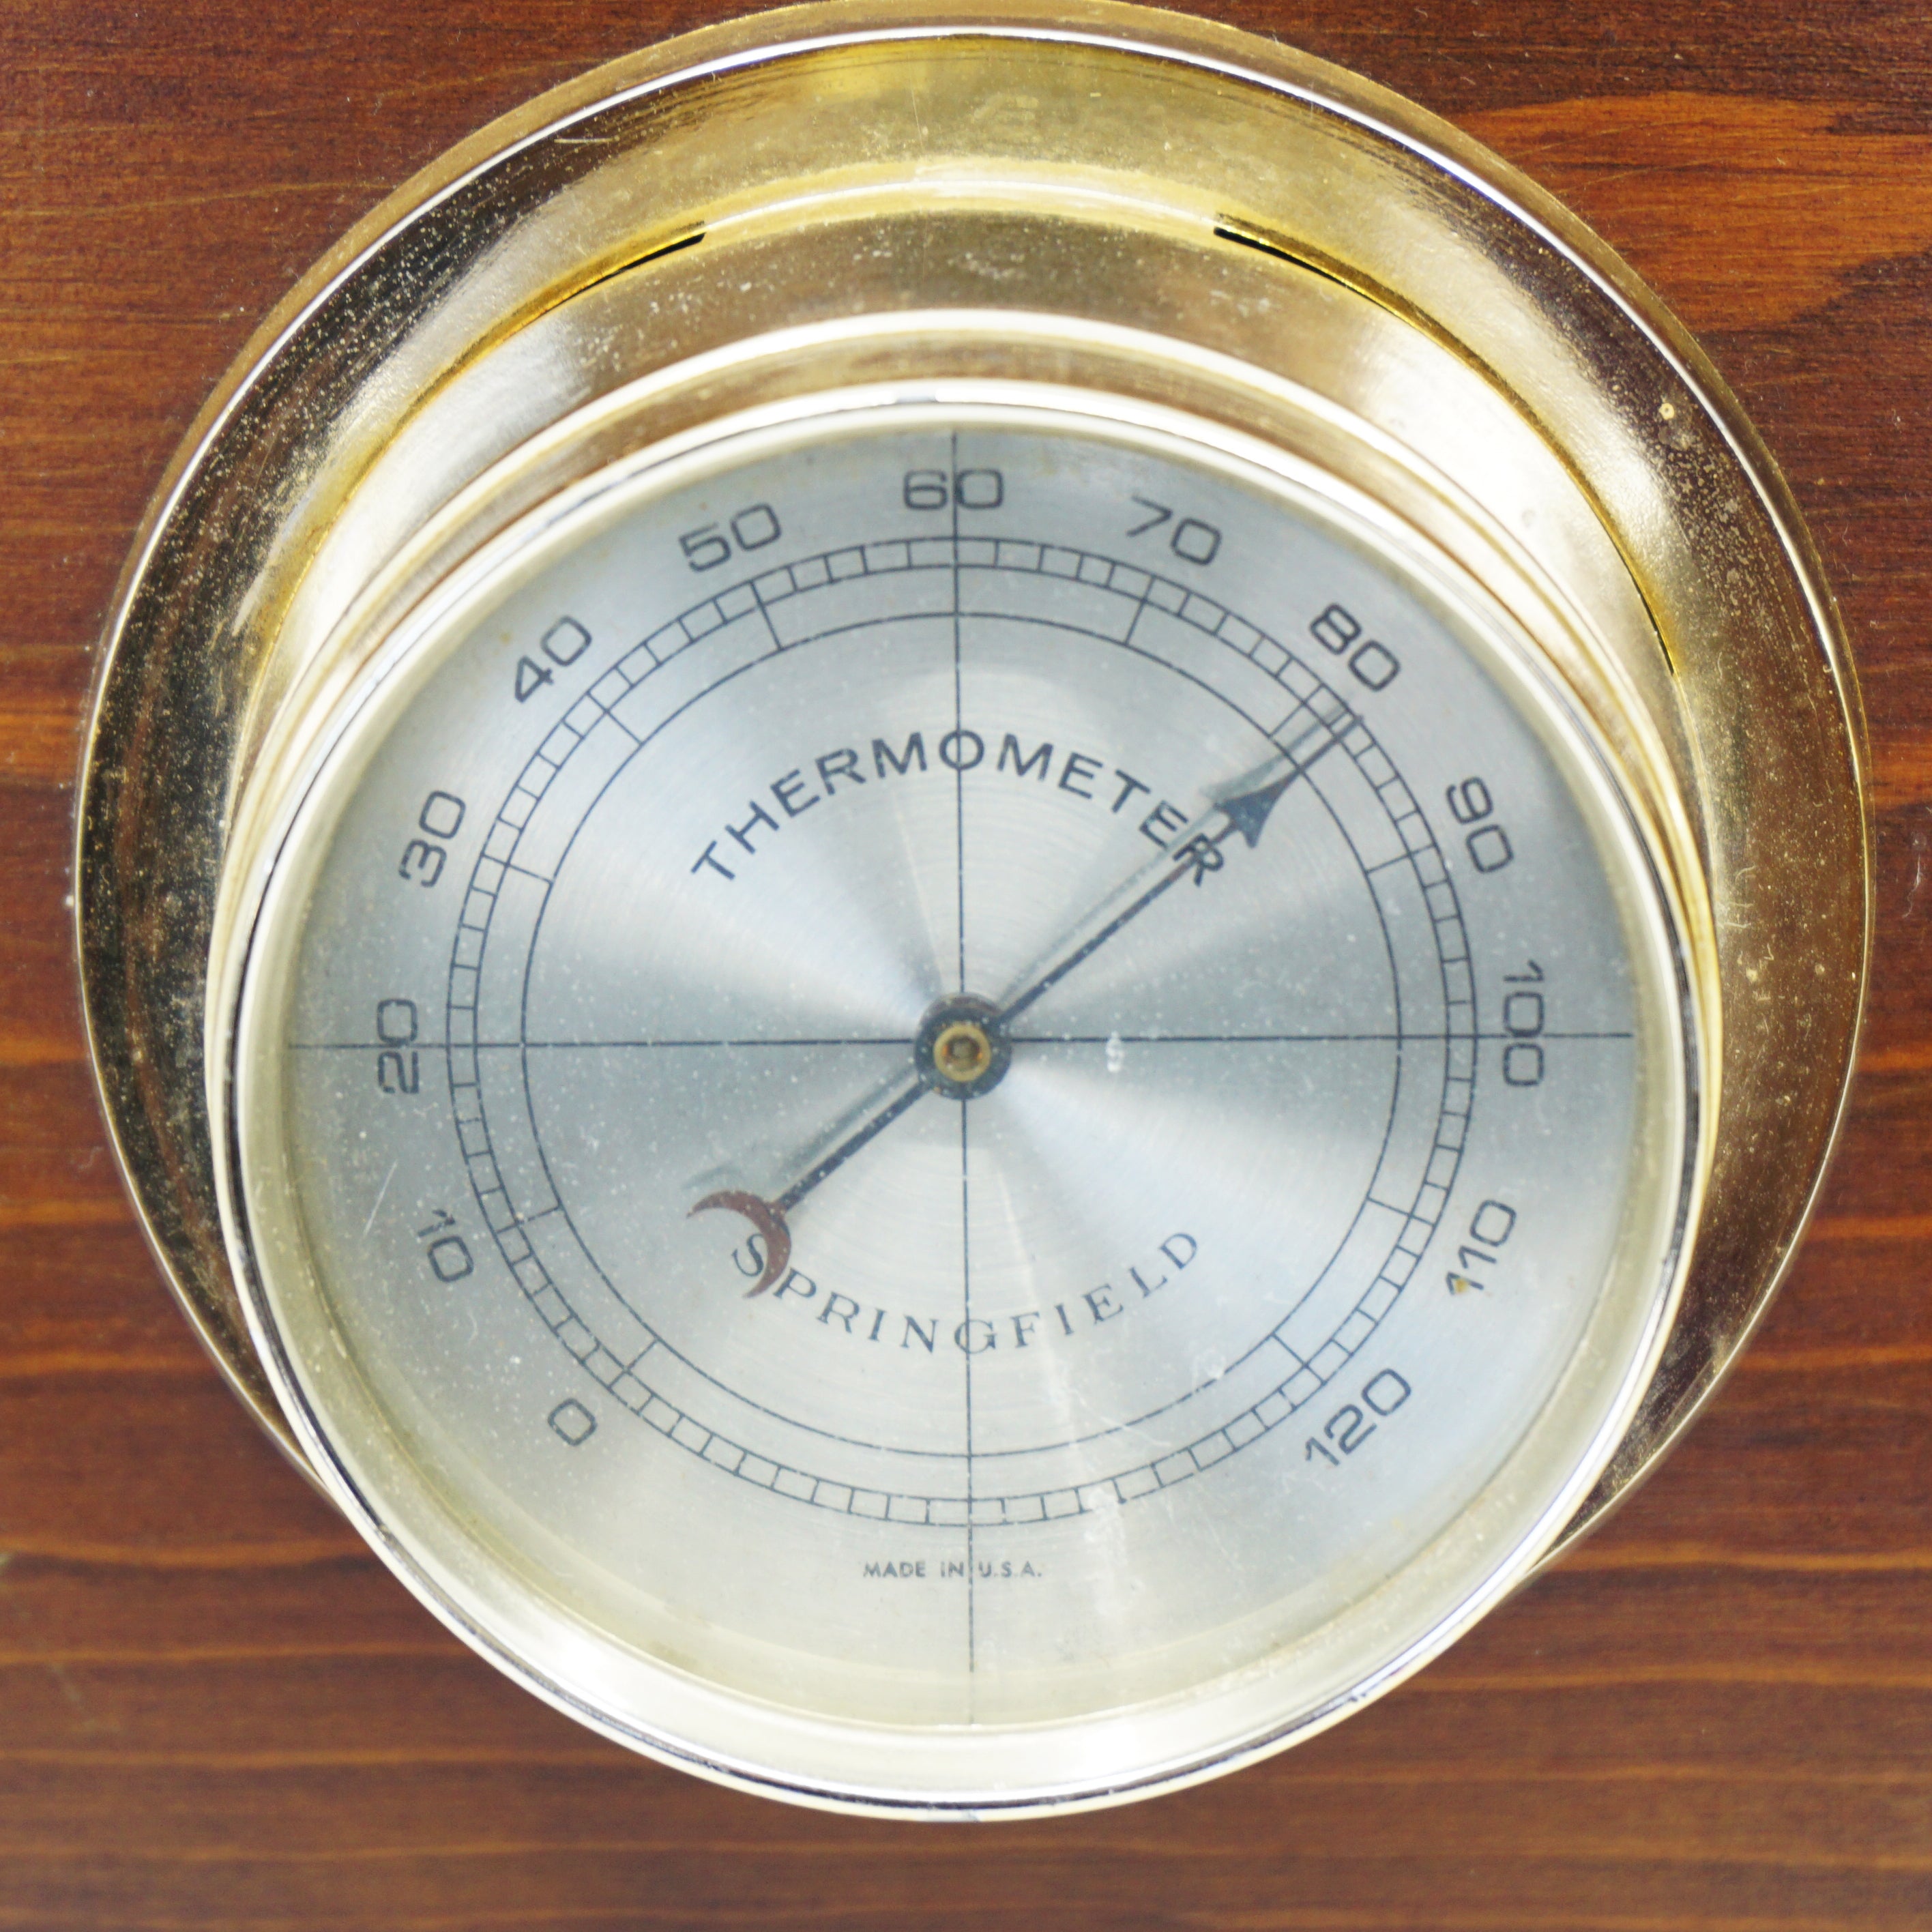 Vintage Thermometer, Barometer and Humidity Meter by Springfield Instrument. Made in USA.